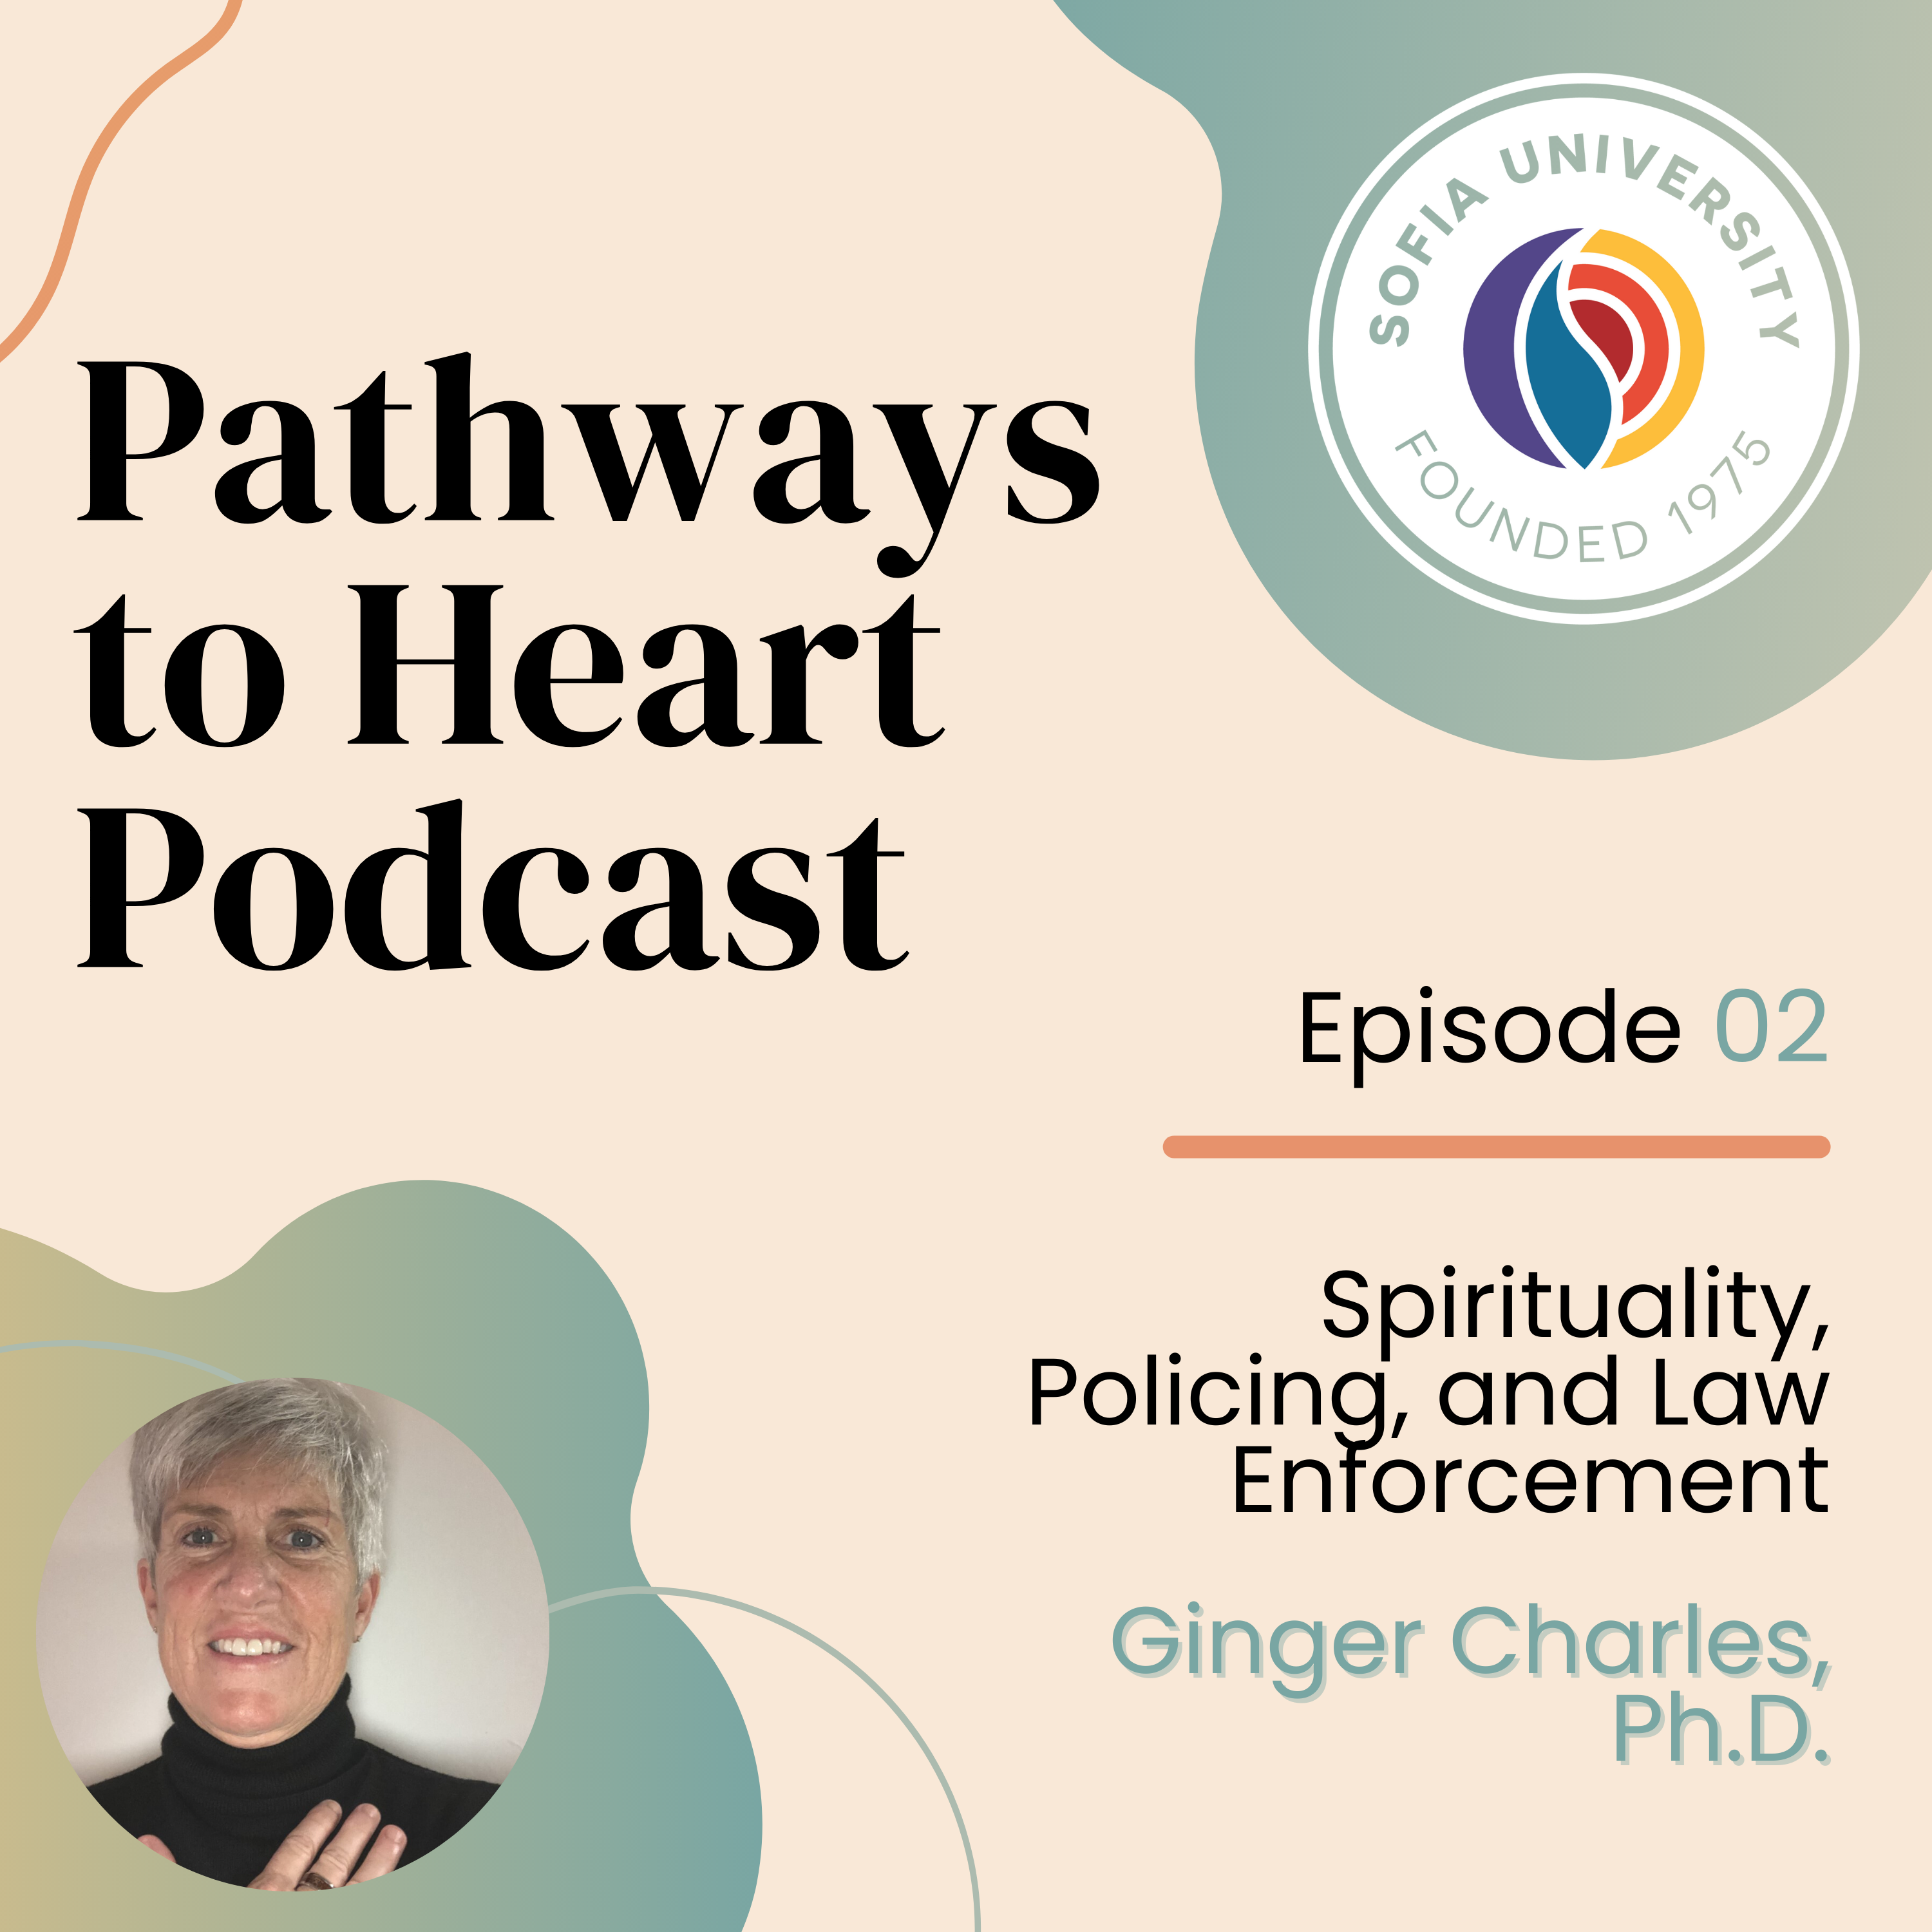 Spirituality, Policing, and Law Enforcement